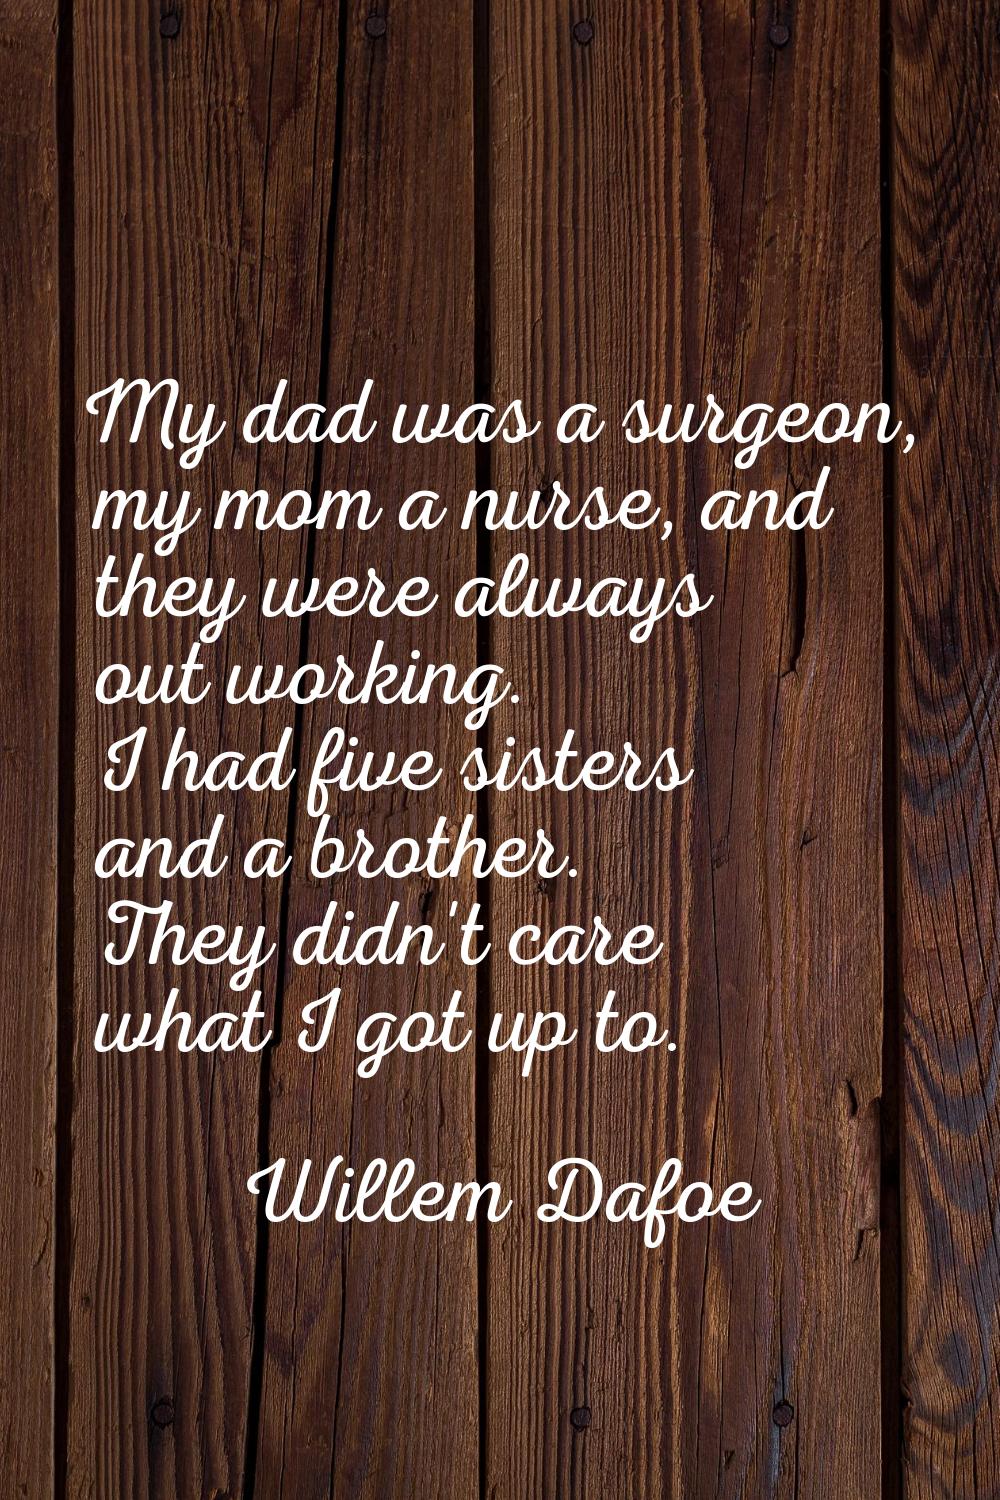 My dad was a surgeon, my mom a nurse, and they were always out working. I had five sisters and a br